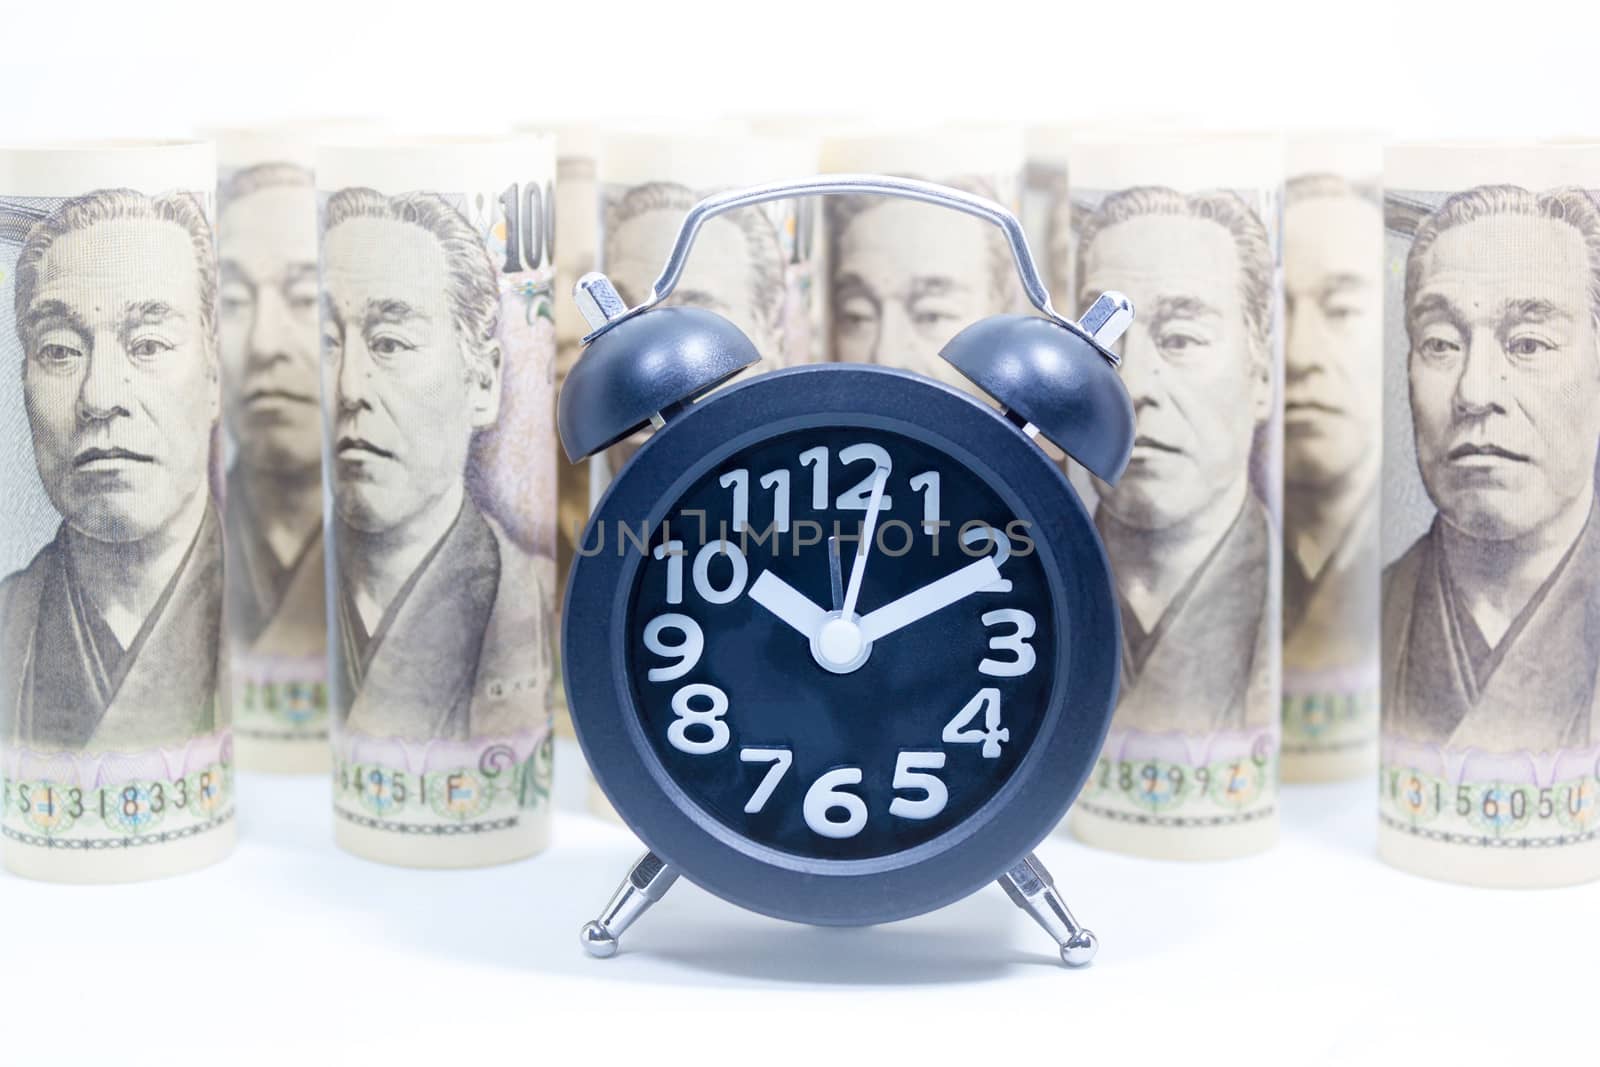 Classic Clock On Roll Of Yen Banknote, Concept And Idea Of Time  by rakoptonLPN